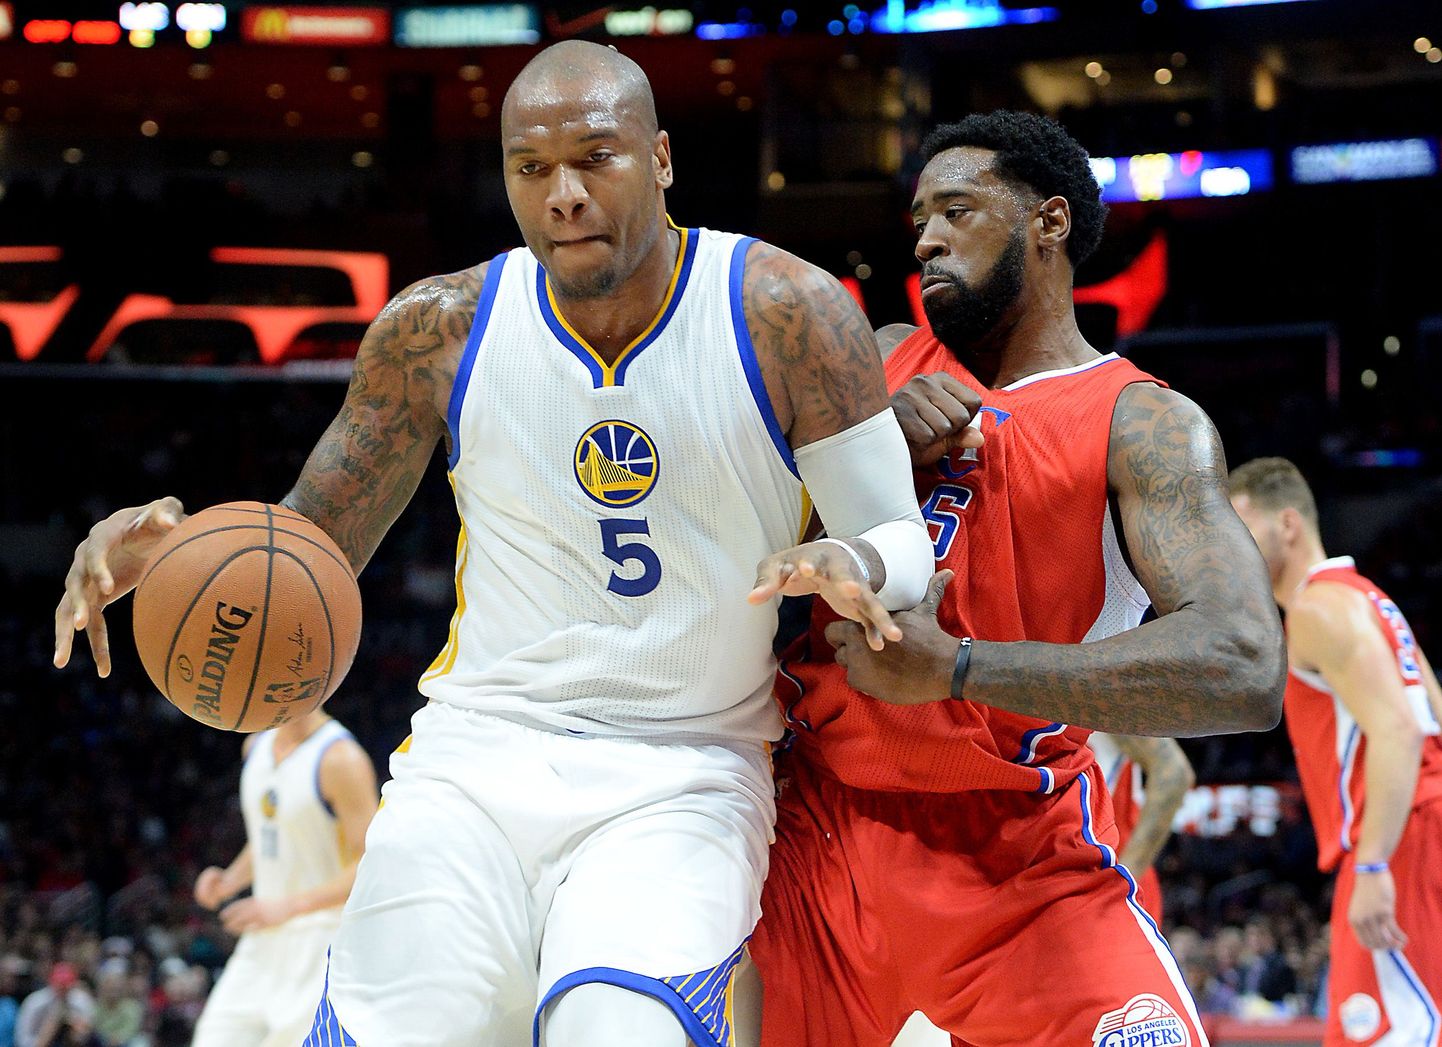 Marreese Speights.